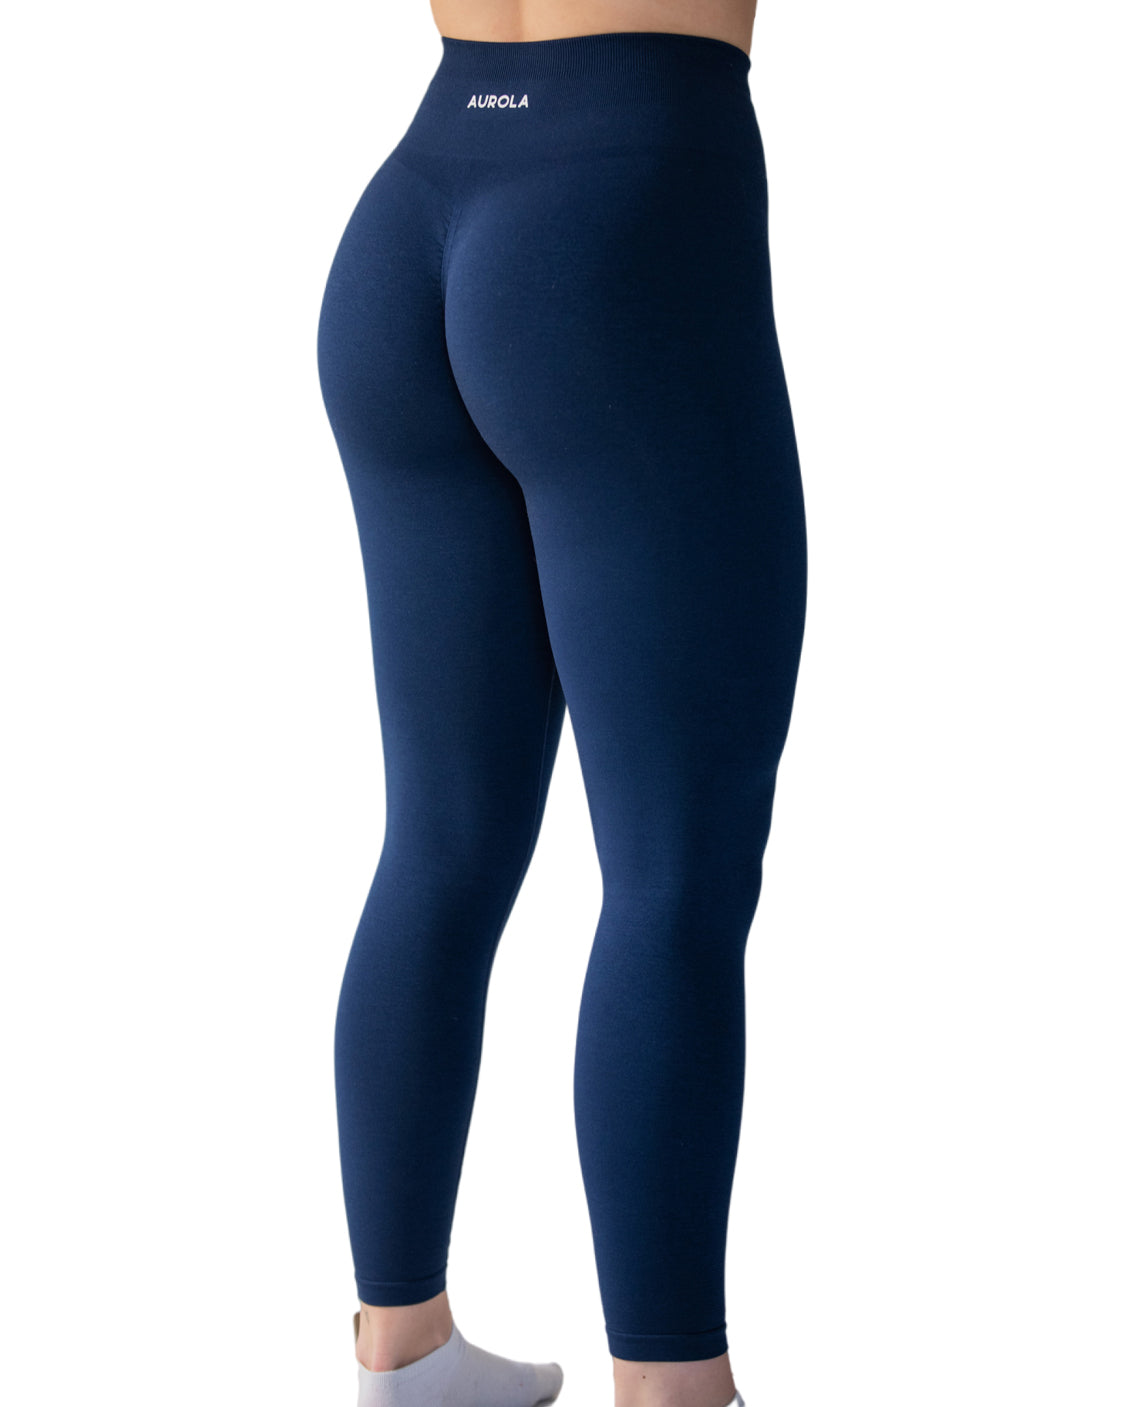 Echt - The Force Scrunch Leggings return in 2022 with an all new fabric and  in all new colours. Shop Now